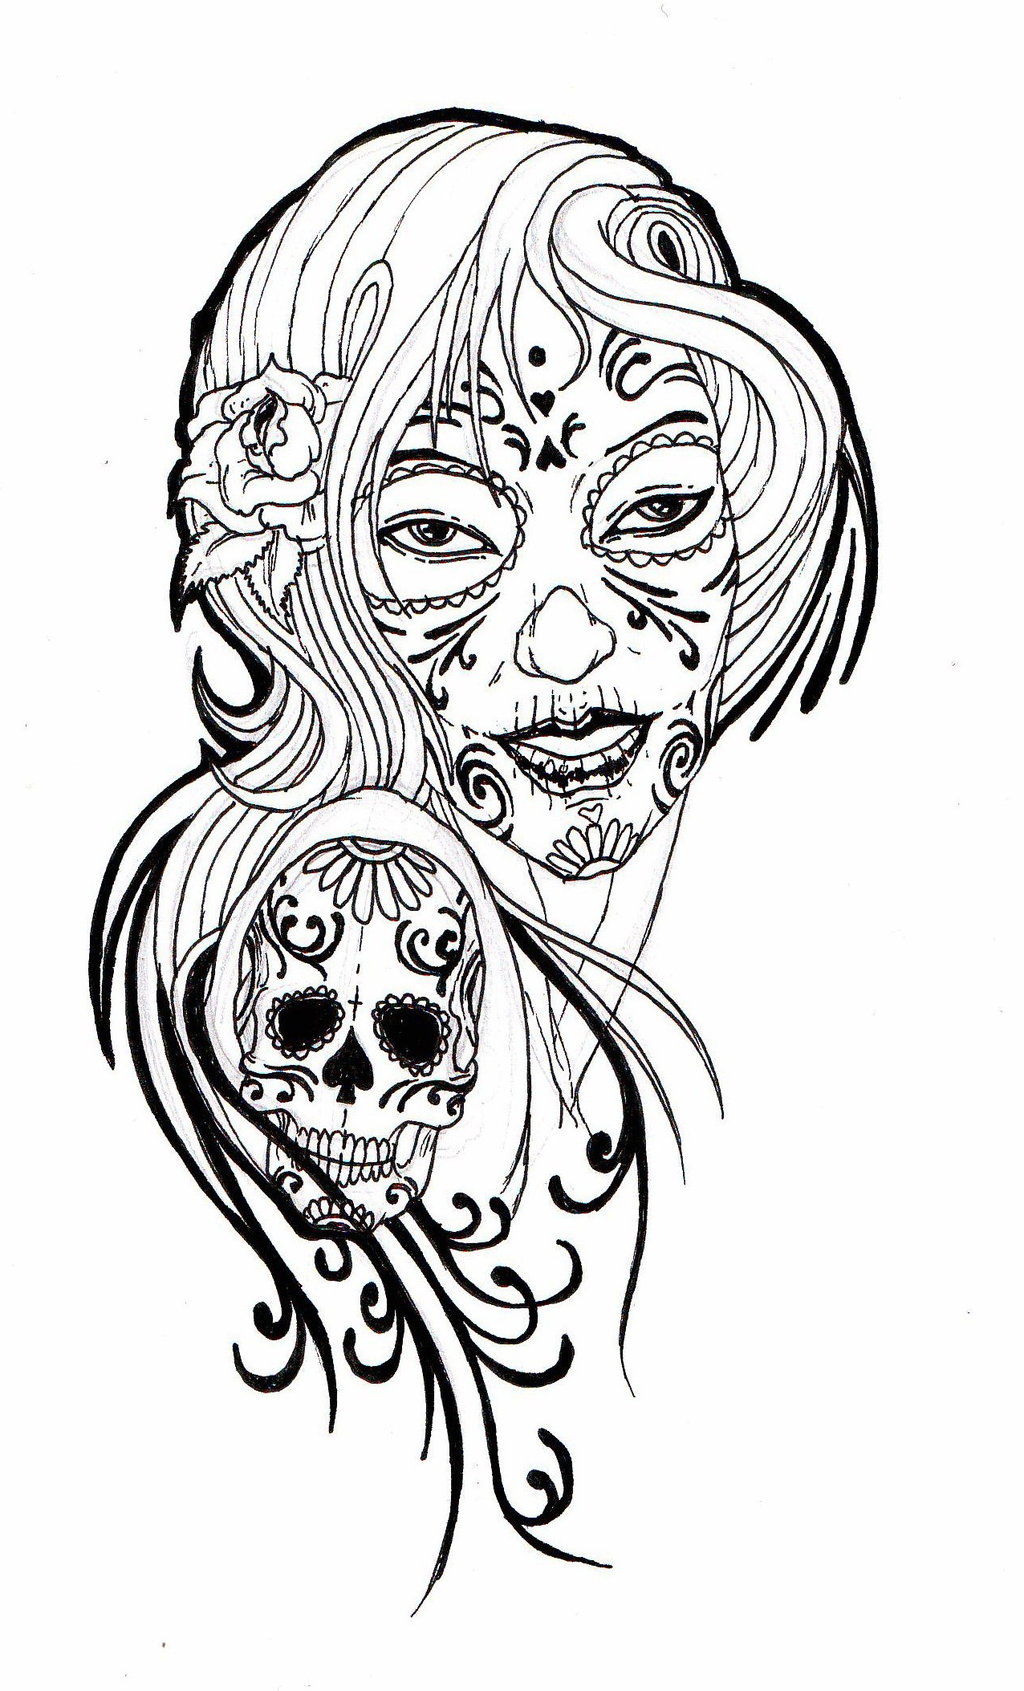 deviantART: More Like Day Of The Dead by